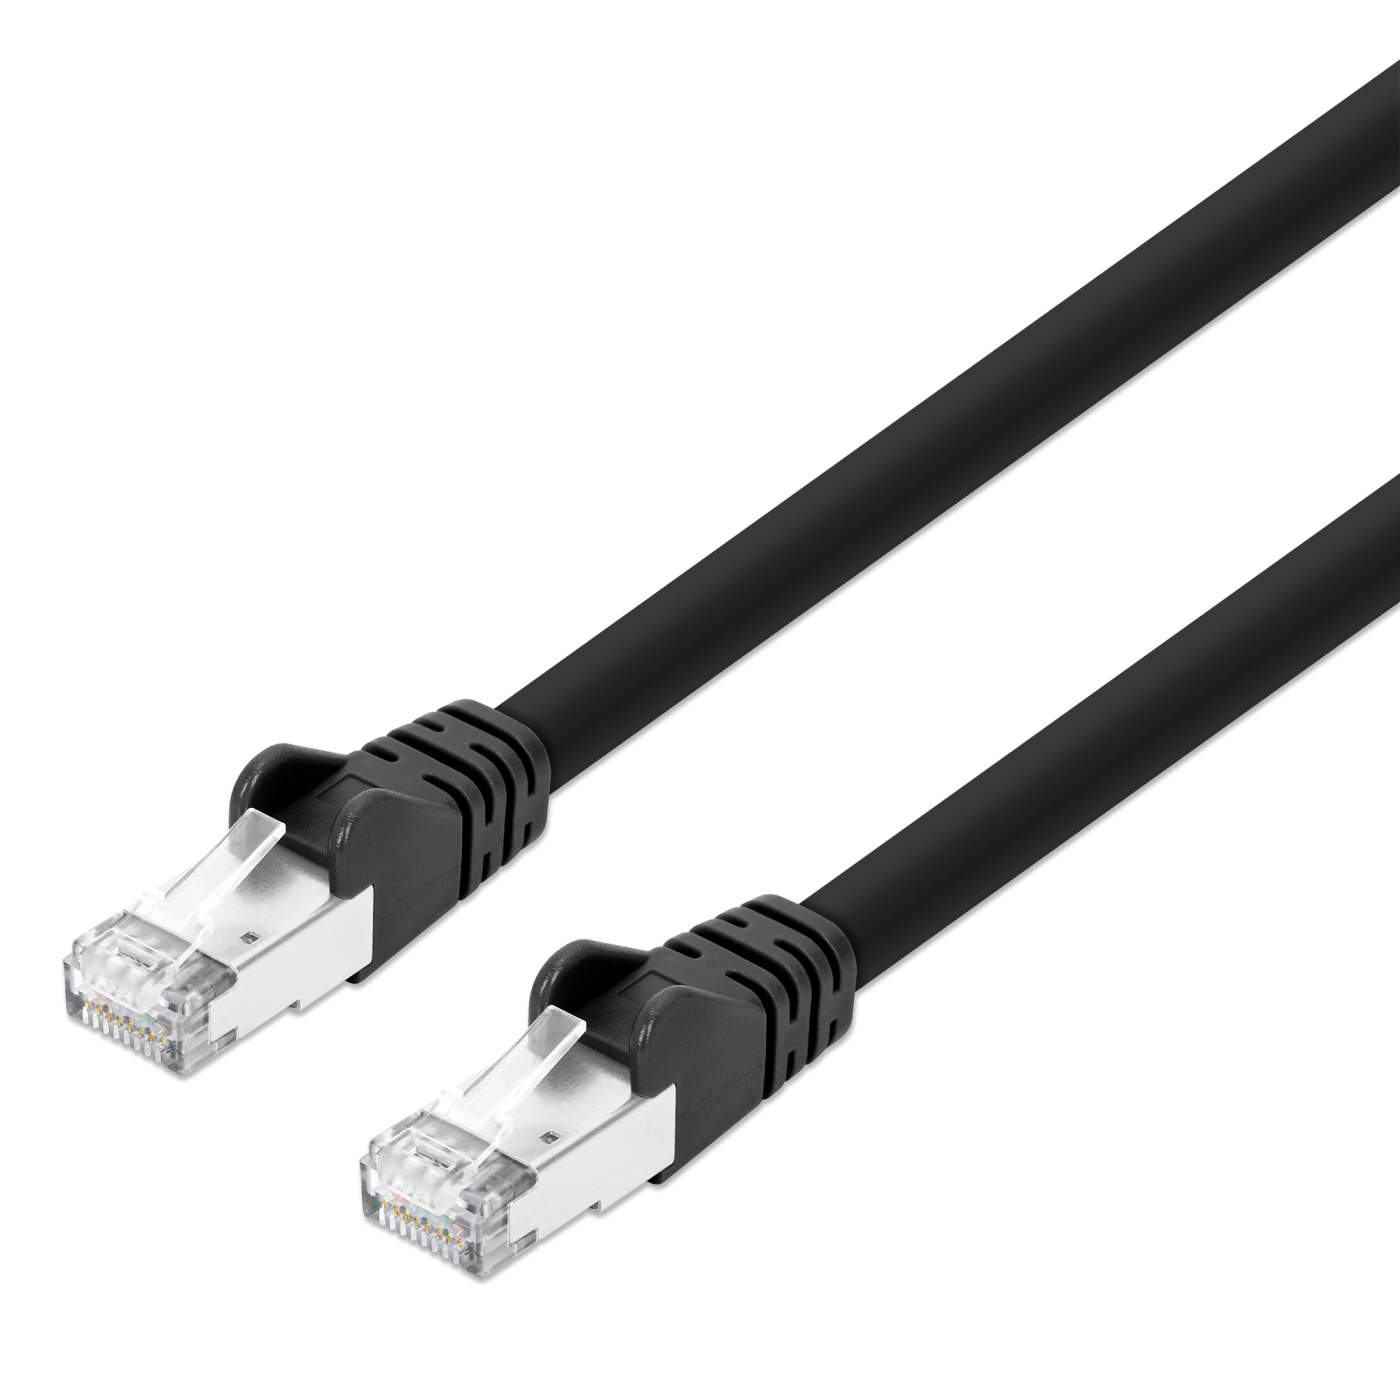 Cat8.1 S/FTP Network Patch Cable, 50 ft., Black Image 1